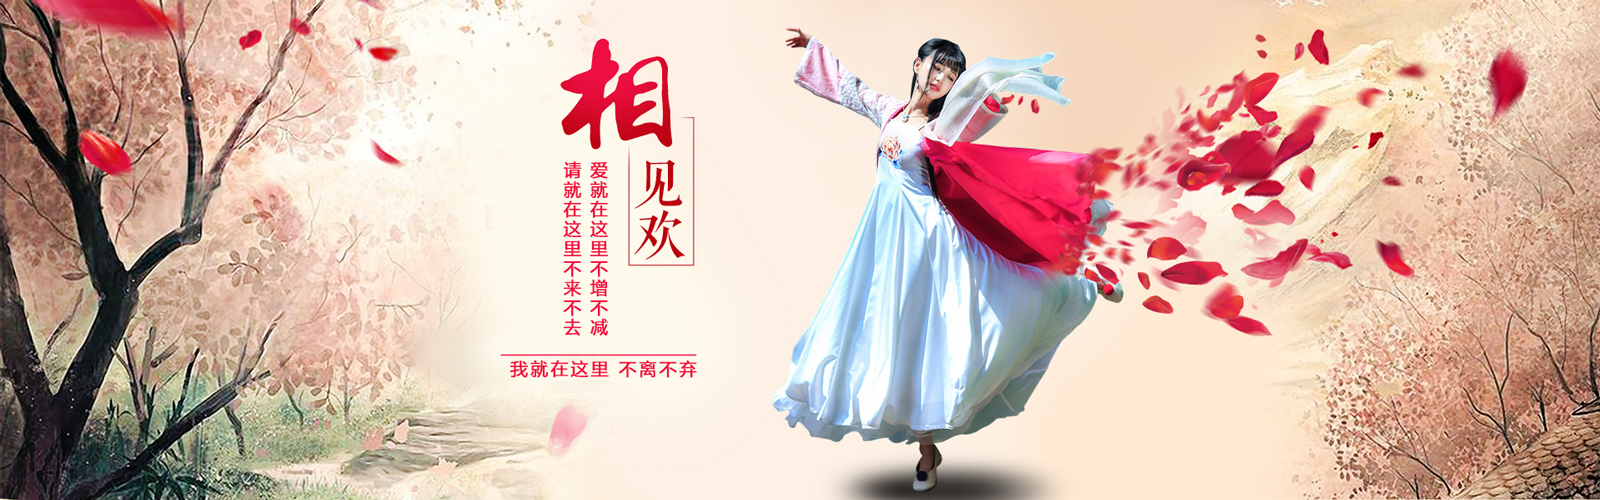 The traditional Chinese style of advertising - PSD File Free Download